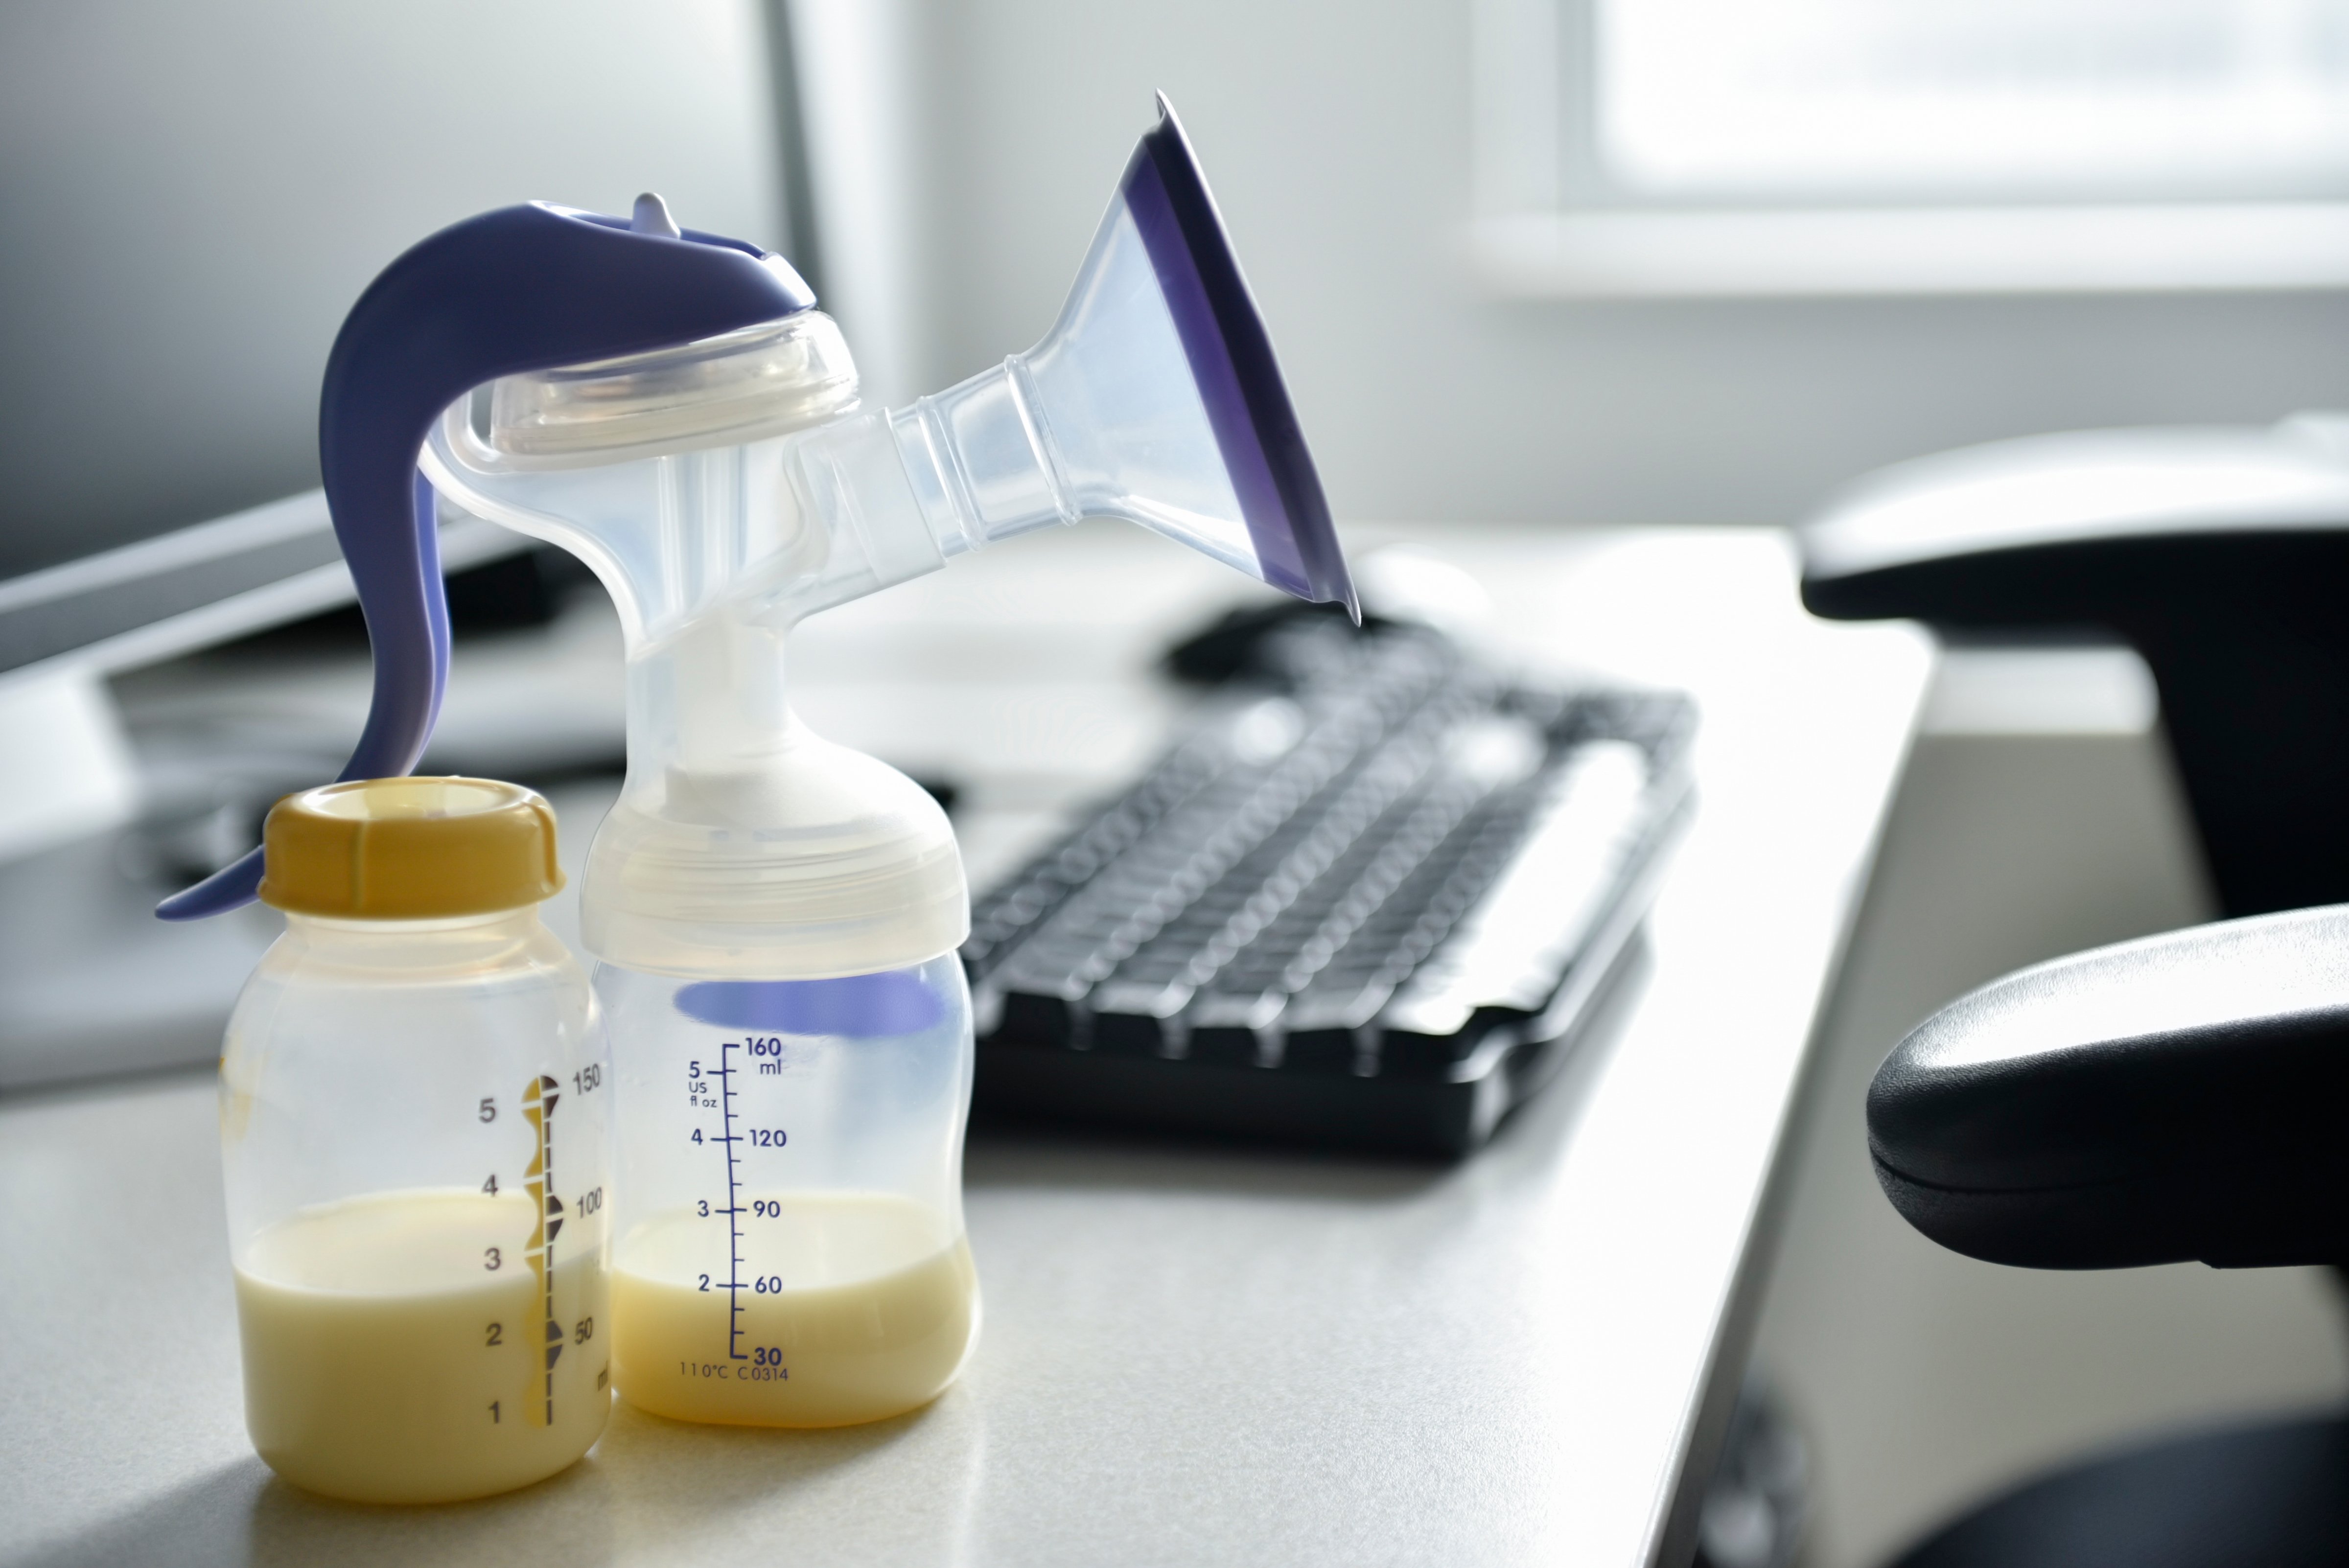 Breast pump and bottle of breast milk near computer (JGI/Jamie Grill&mdash;Getty Images/Blend Images)